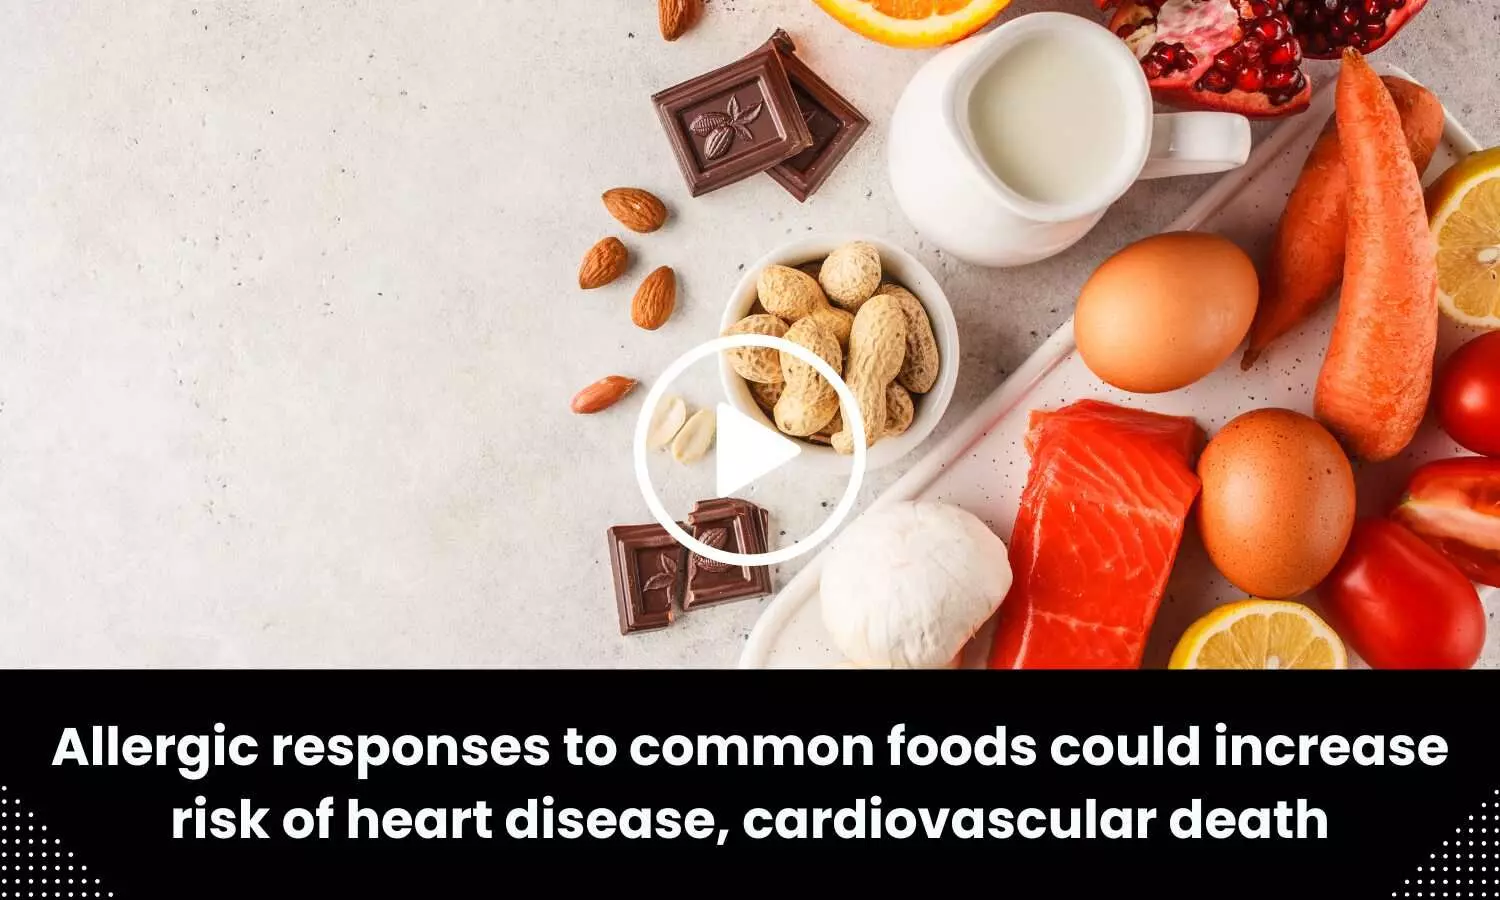 Allergic responses to common foods could increase risk of heart disease, cardiovascular death